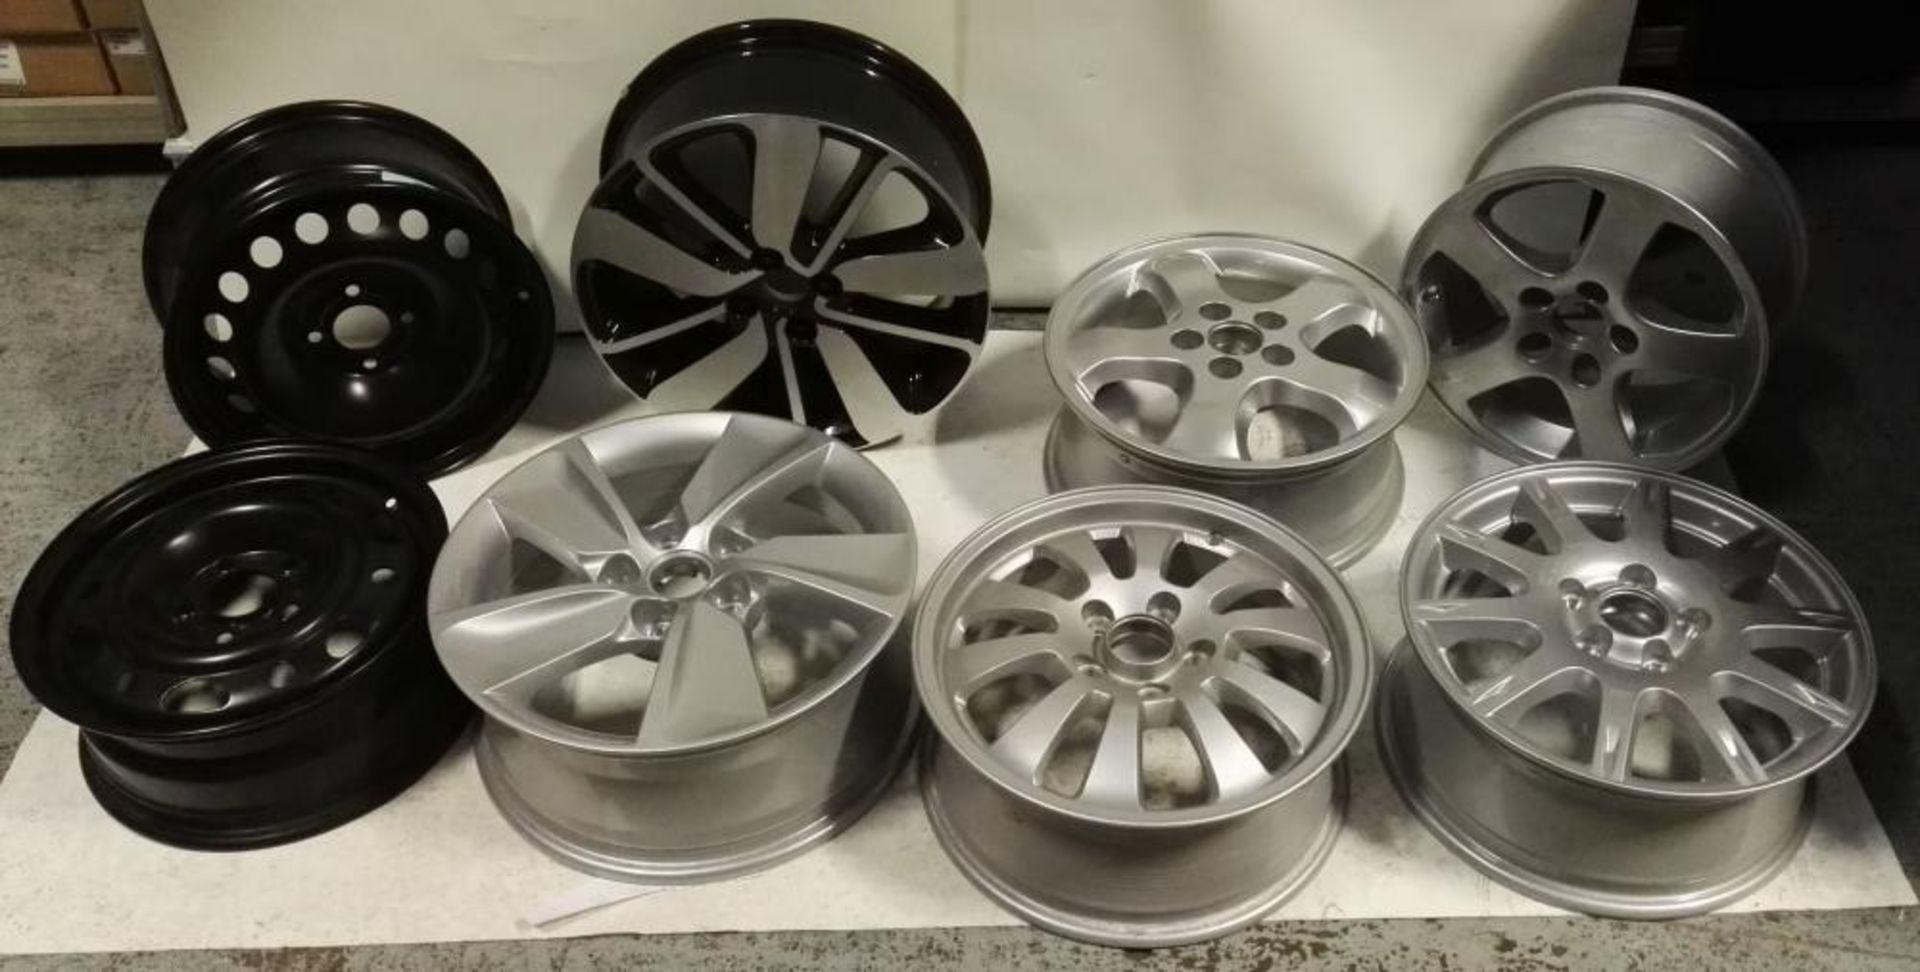 8 x Assorted Alloy Wheels - 15" to 17" - Saab, Opel, Vauxhall, Renault, BBS - CL084 - Location: Altr